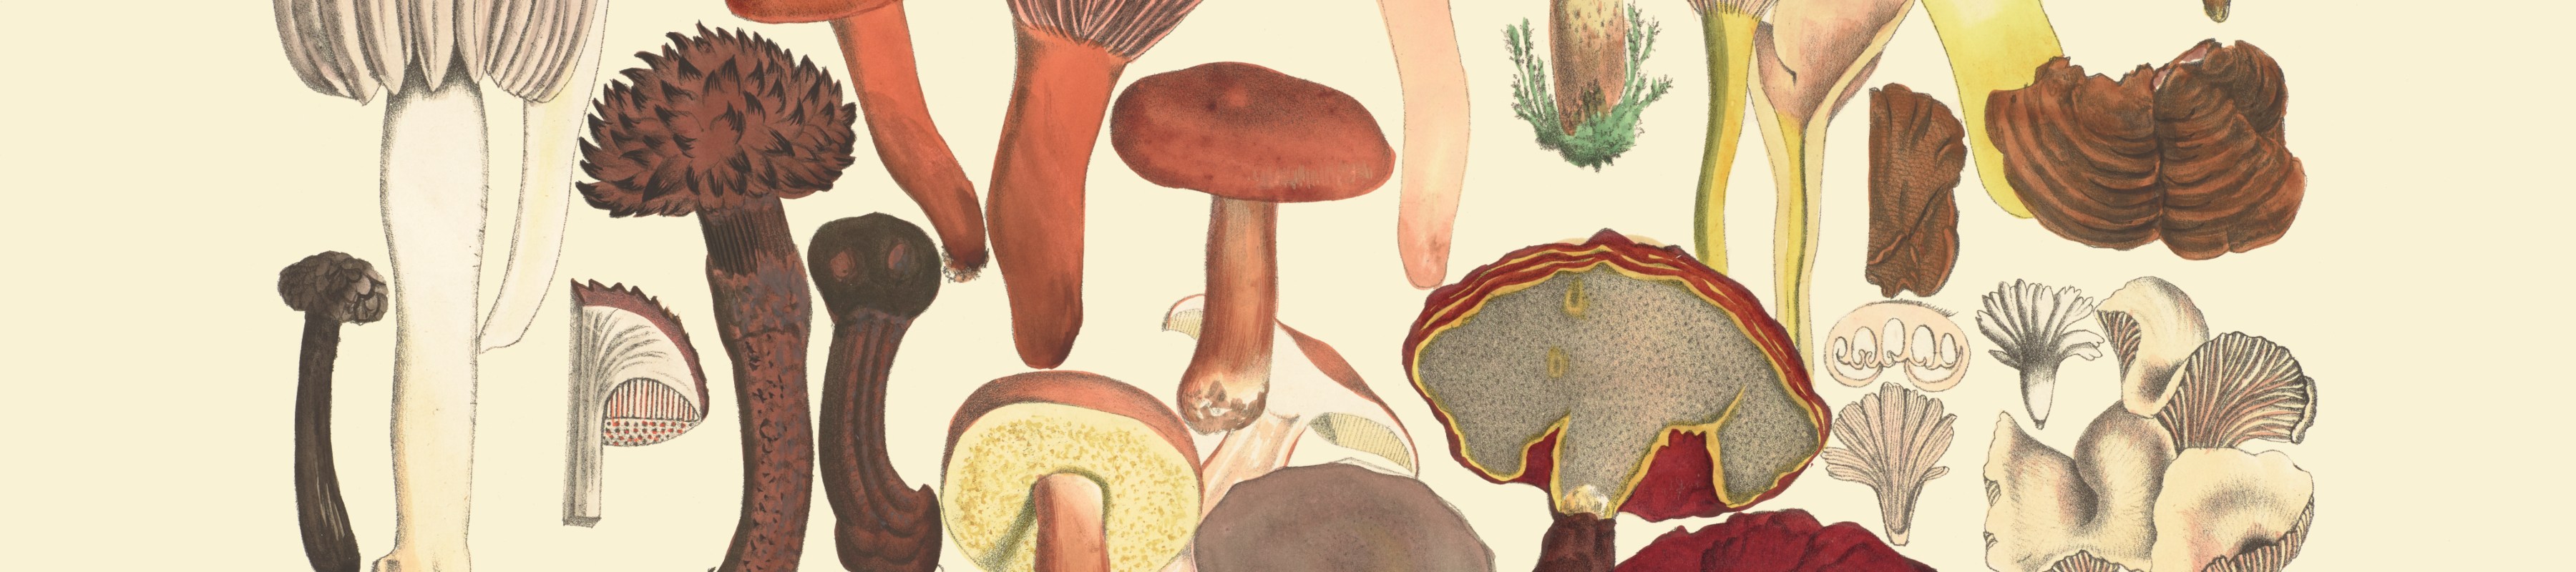 An illustration of several different kinds of fungi